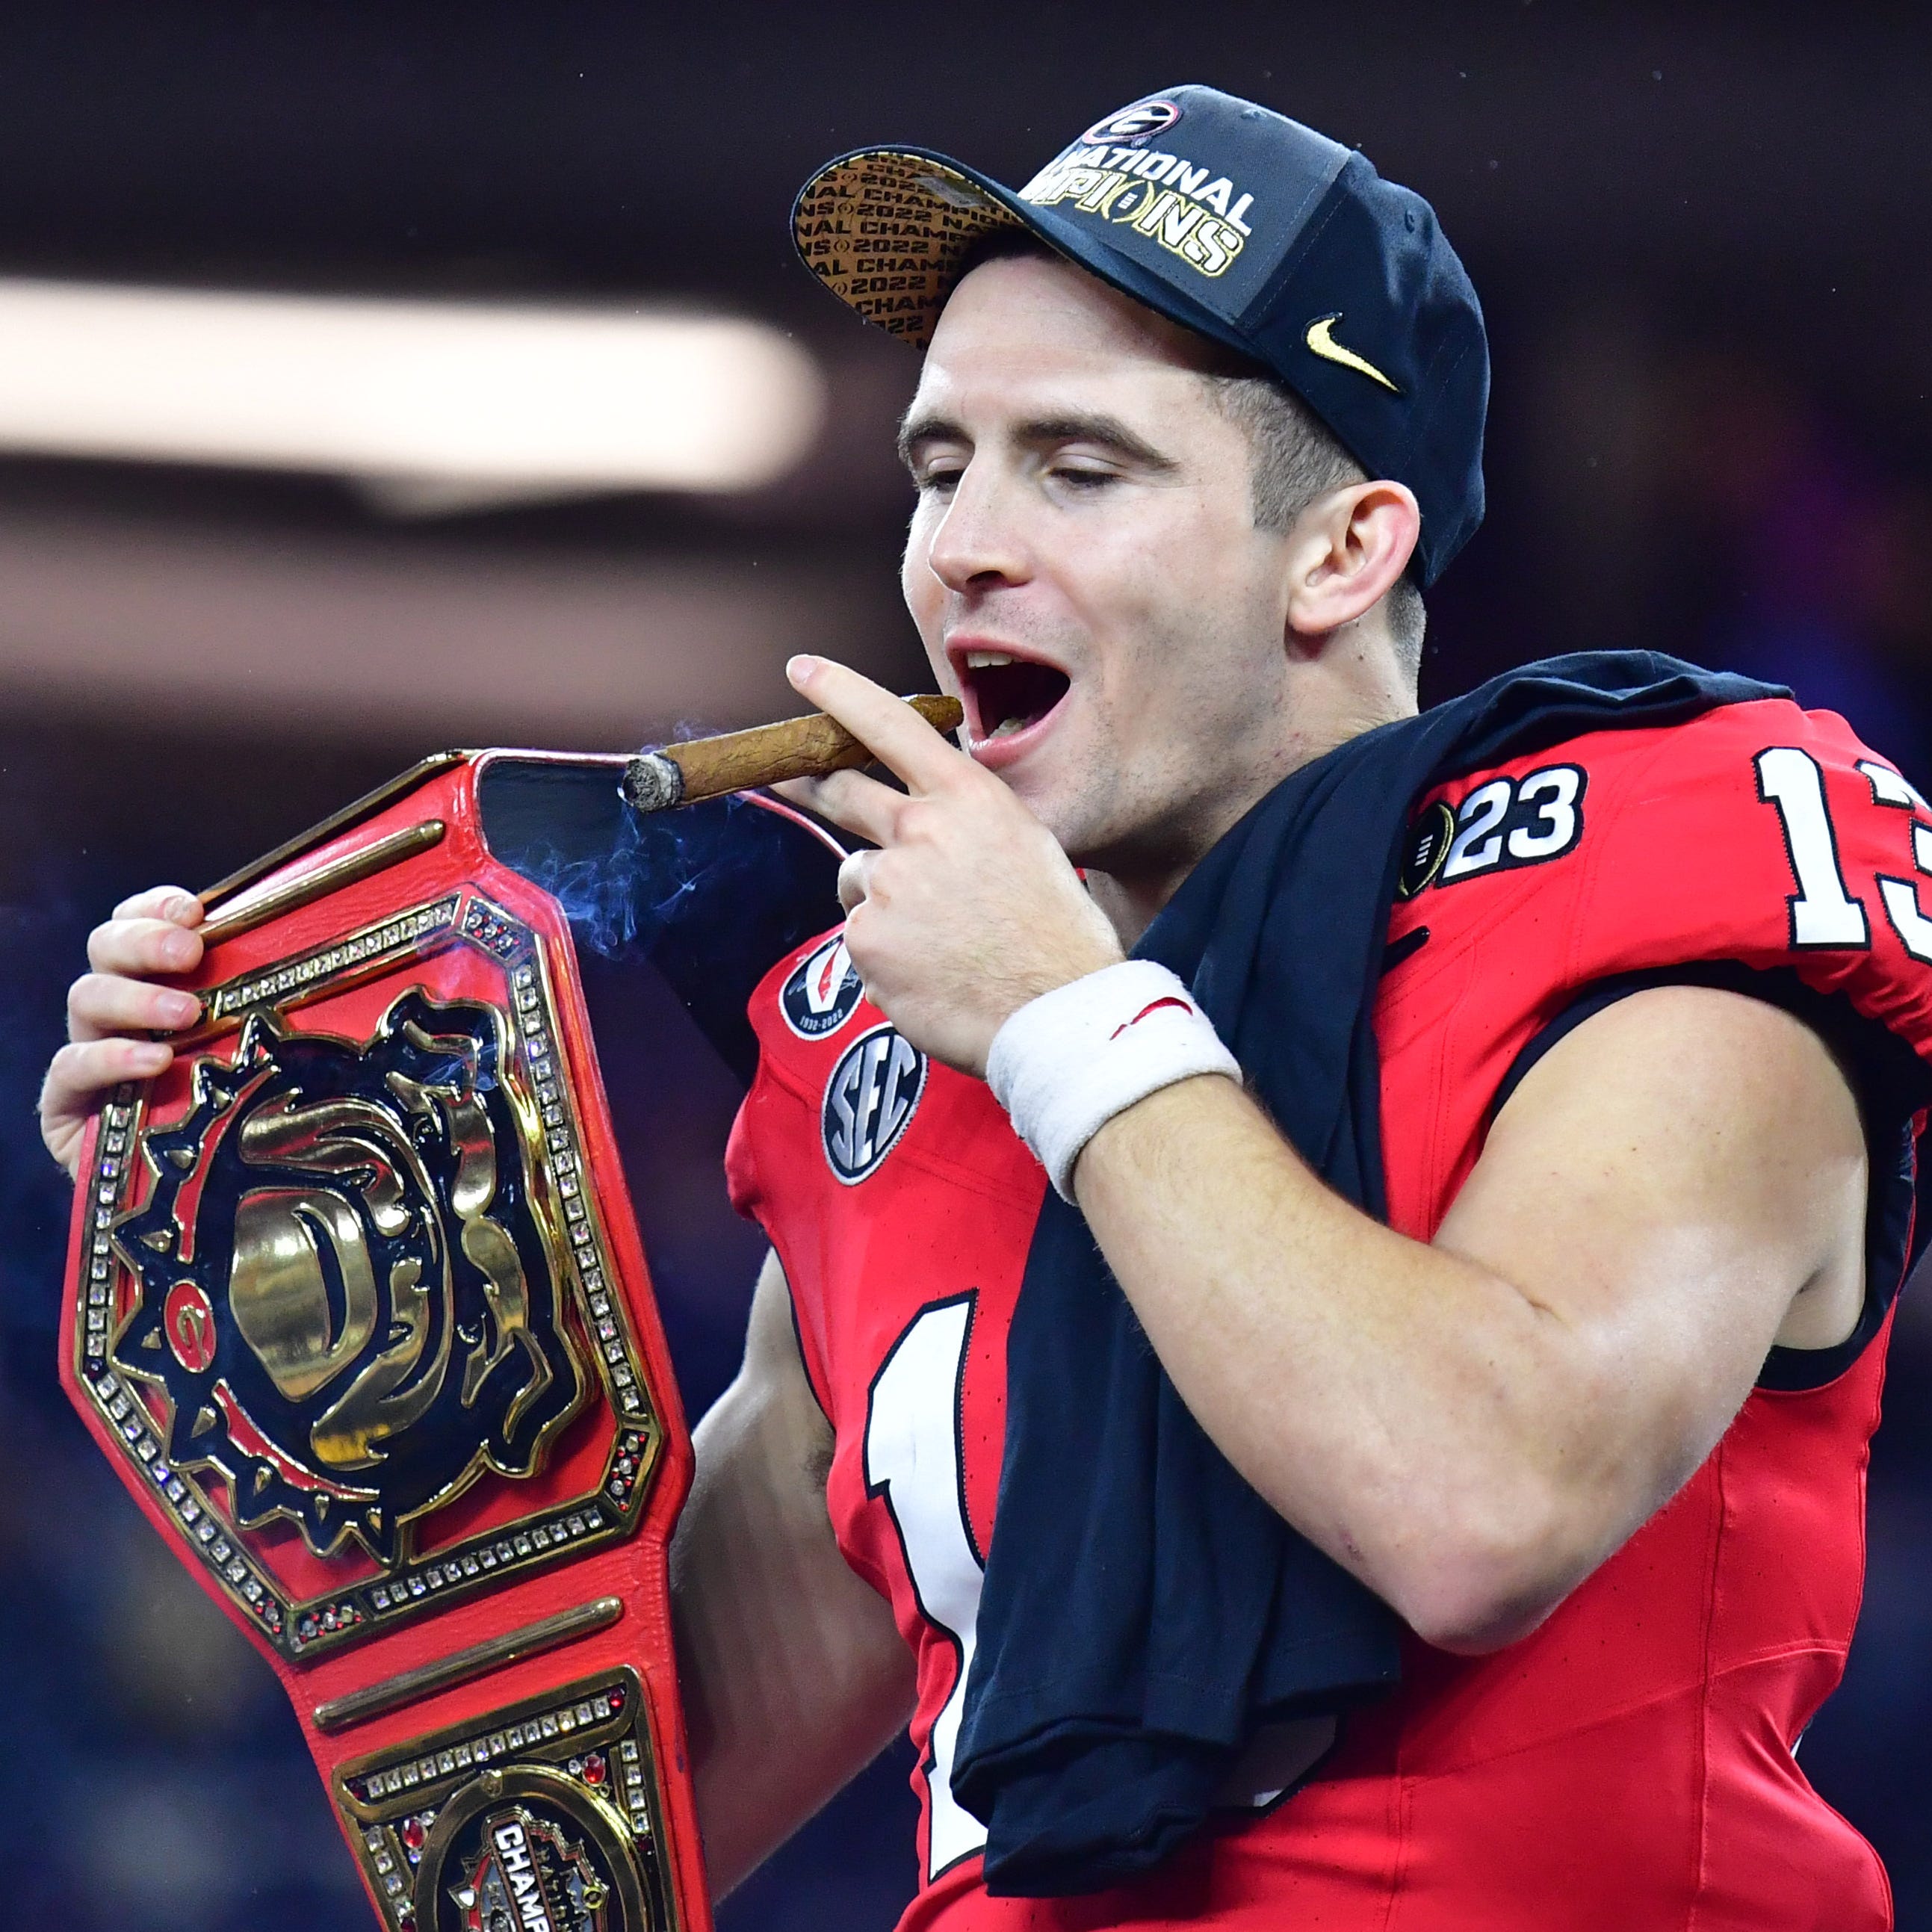 Georgia Bulldogs quarterback Stetson Bennett (13) celebrates with a cigar and championship belt after defeating the TCU Horned Frogs in the CFP national championship game at SoFi Stadium.